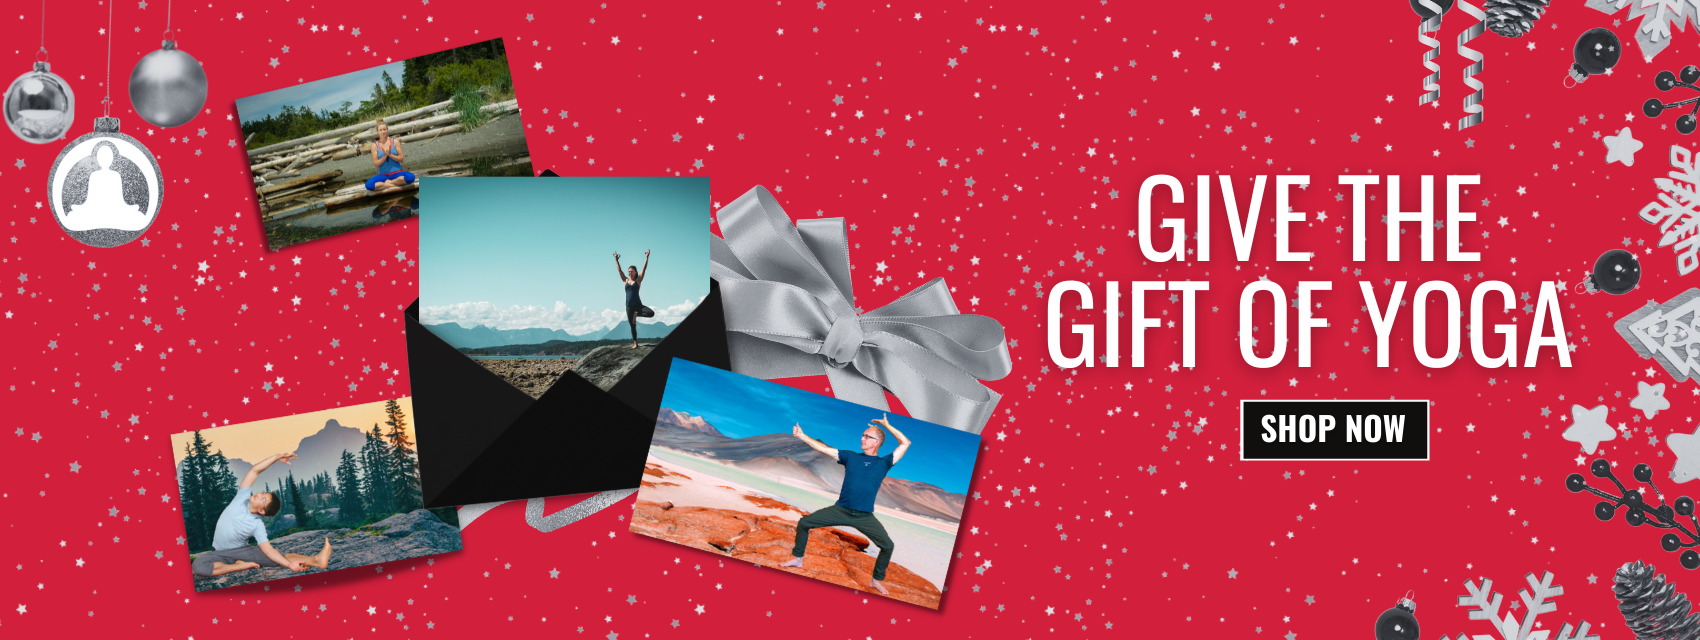 Give the Gift of Yoga - DoYogaWithMe E-Gift Cards